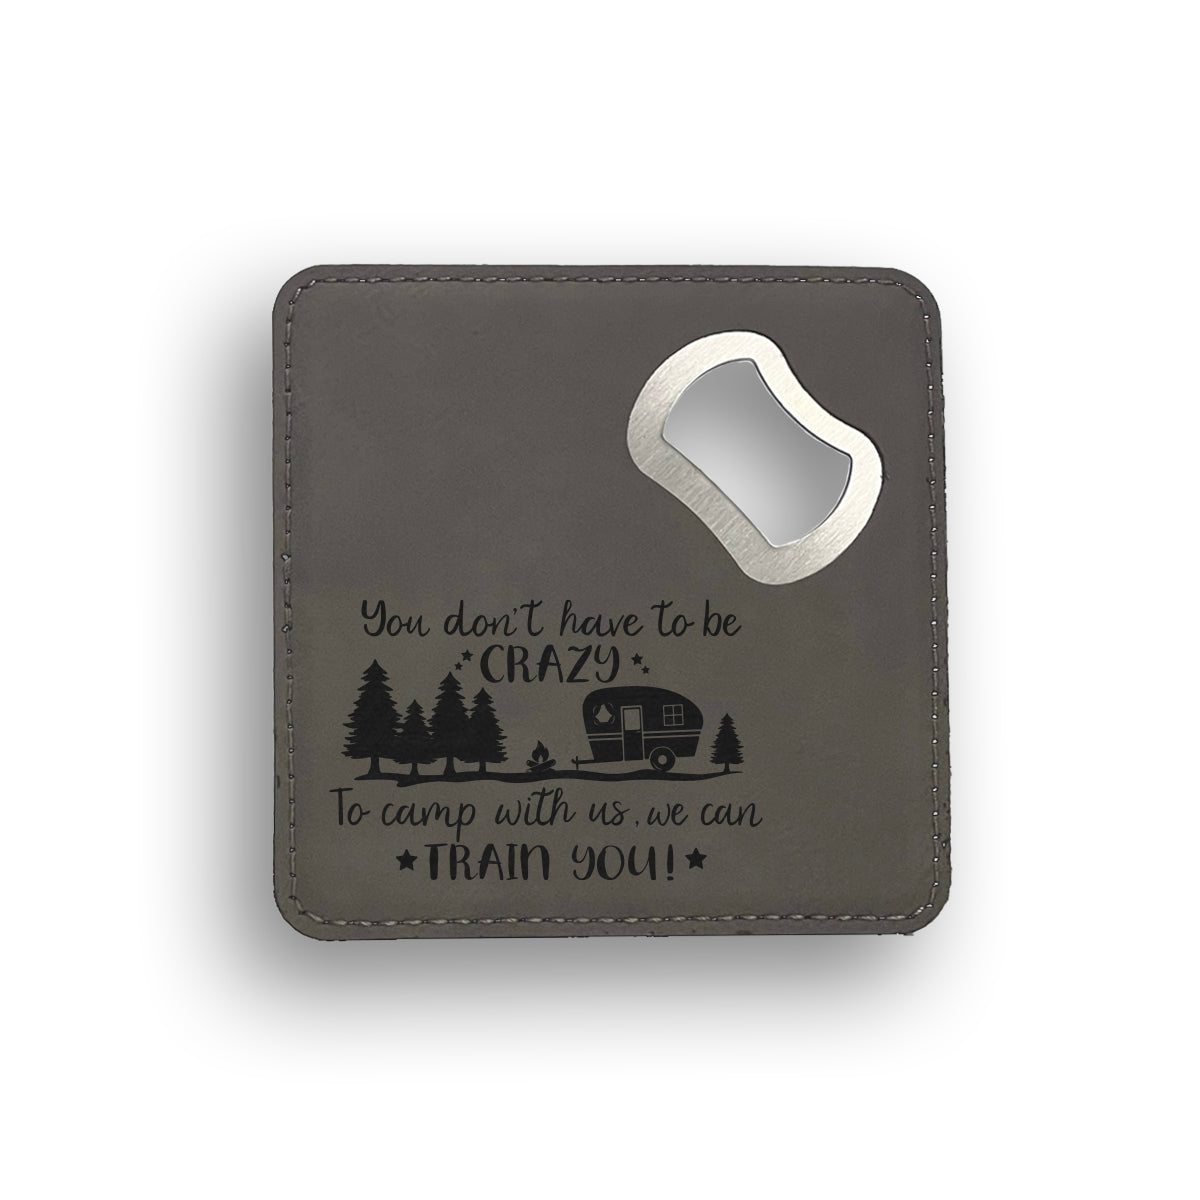 You Don't Have to Be Crazy Bottle Opener Coaster